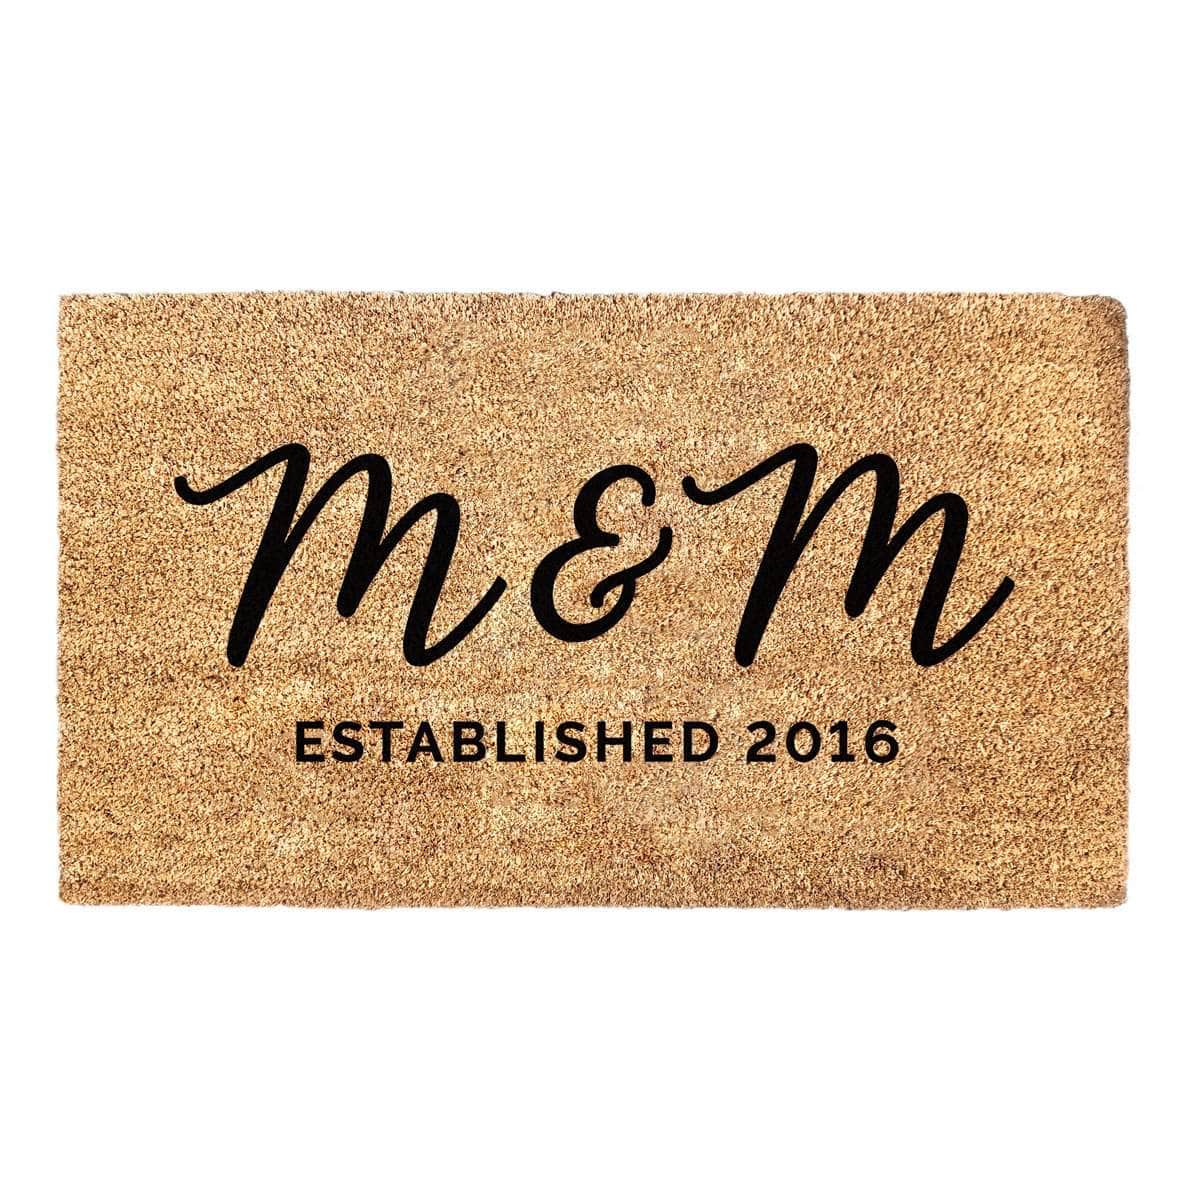 Personalized Initials and Established Date - Doormat